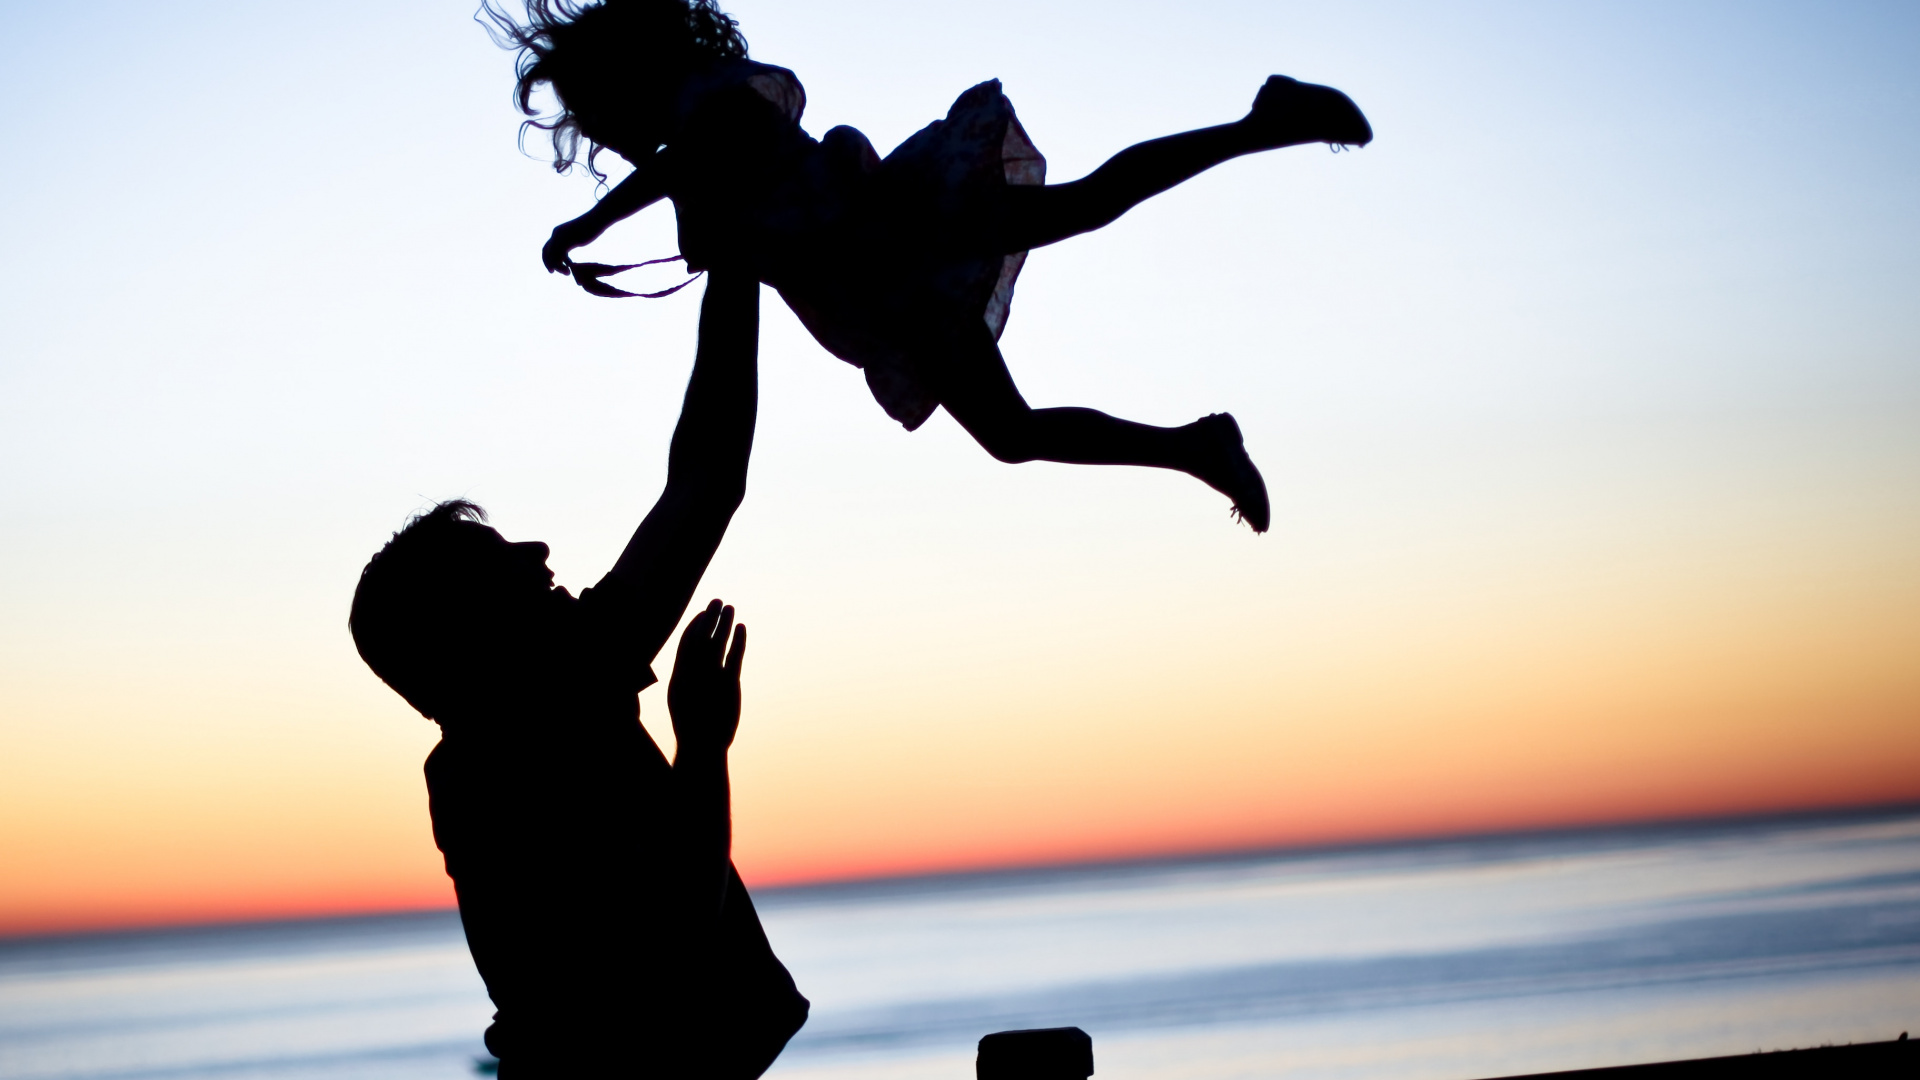 Father, Daughter, Family, People in Nature, Jumping. Wallpaper in 1920x1080 Resolution